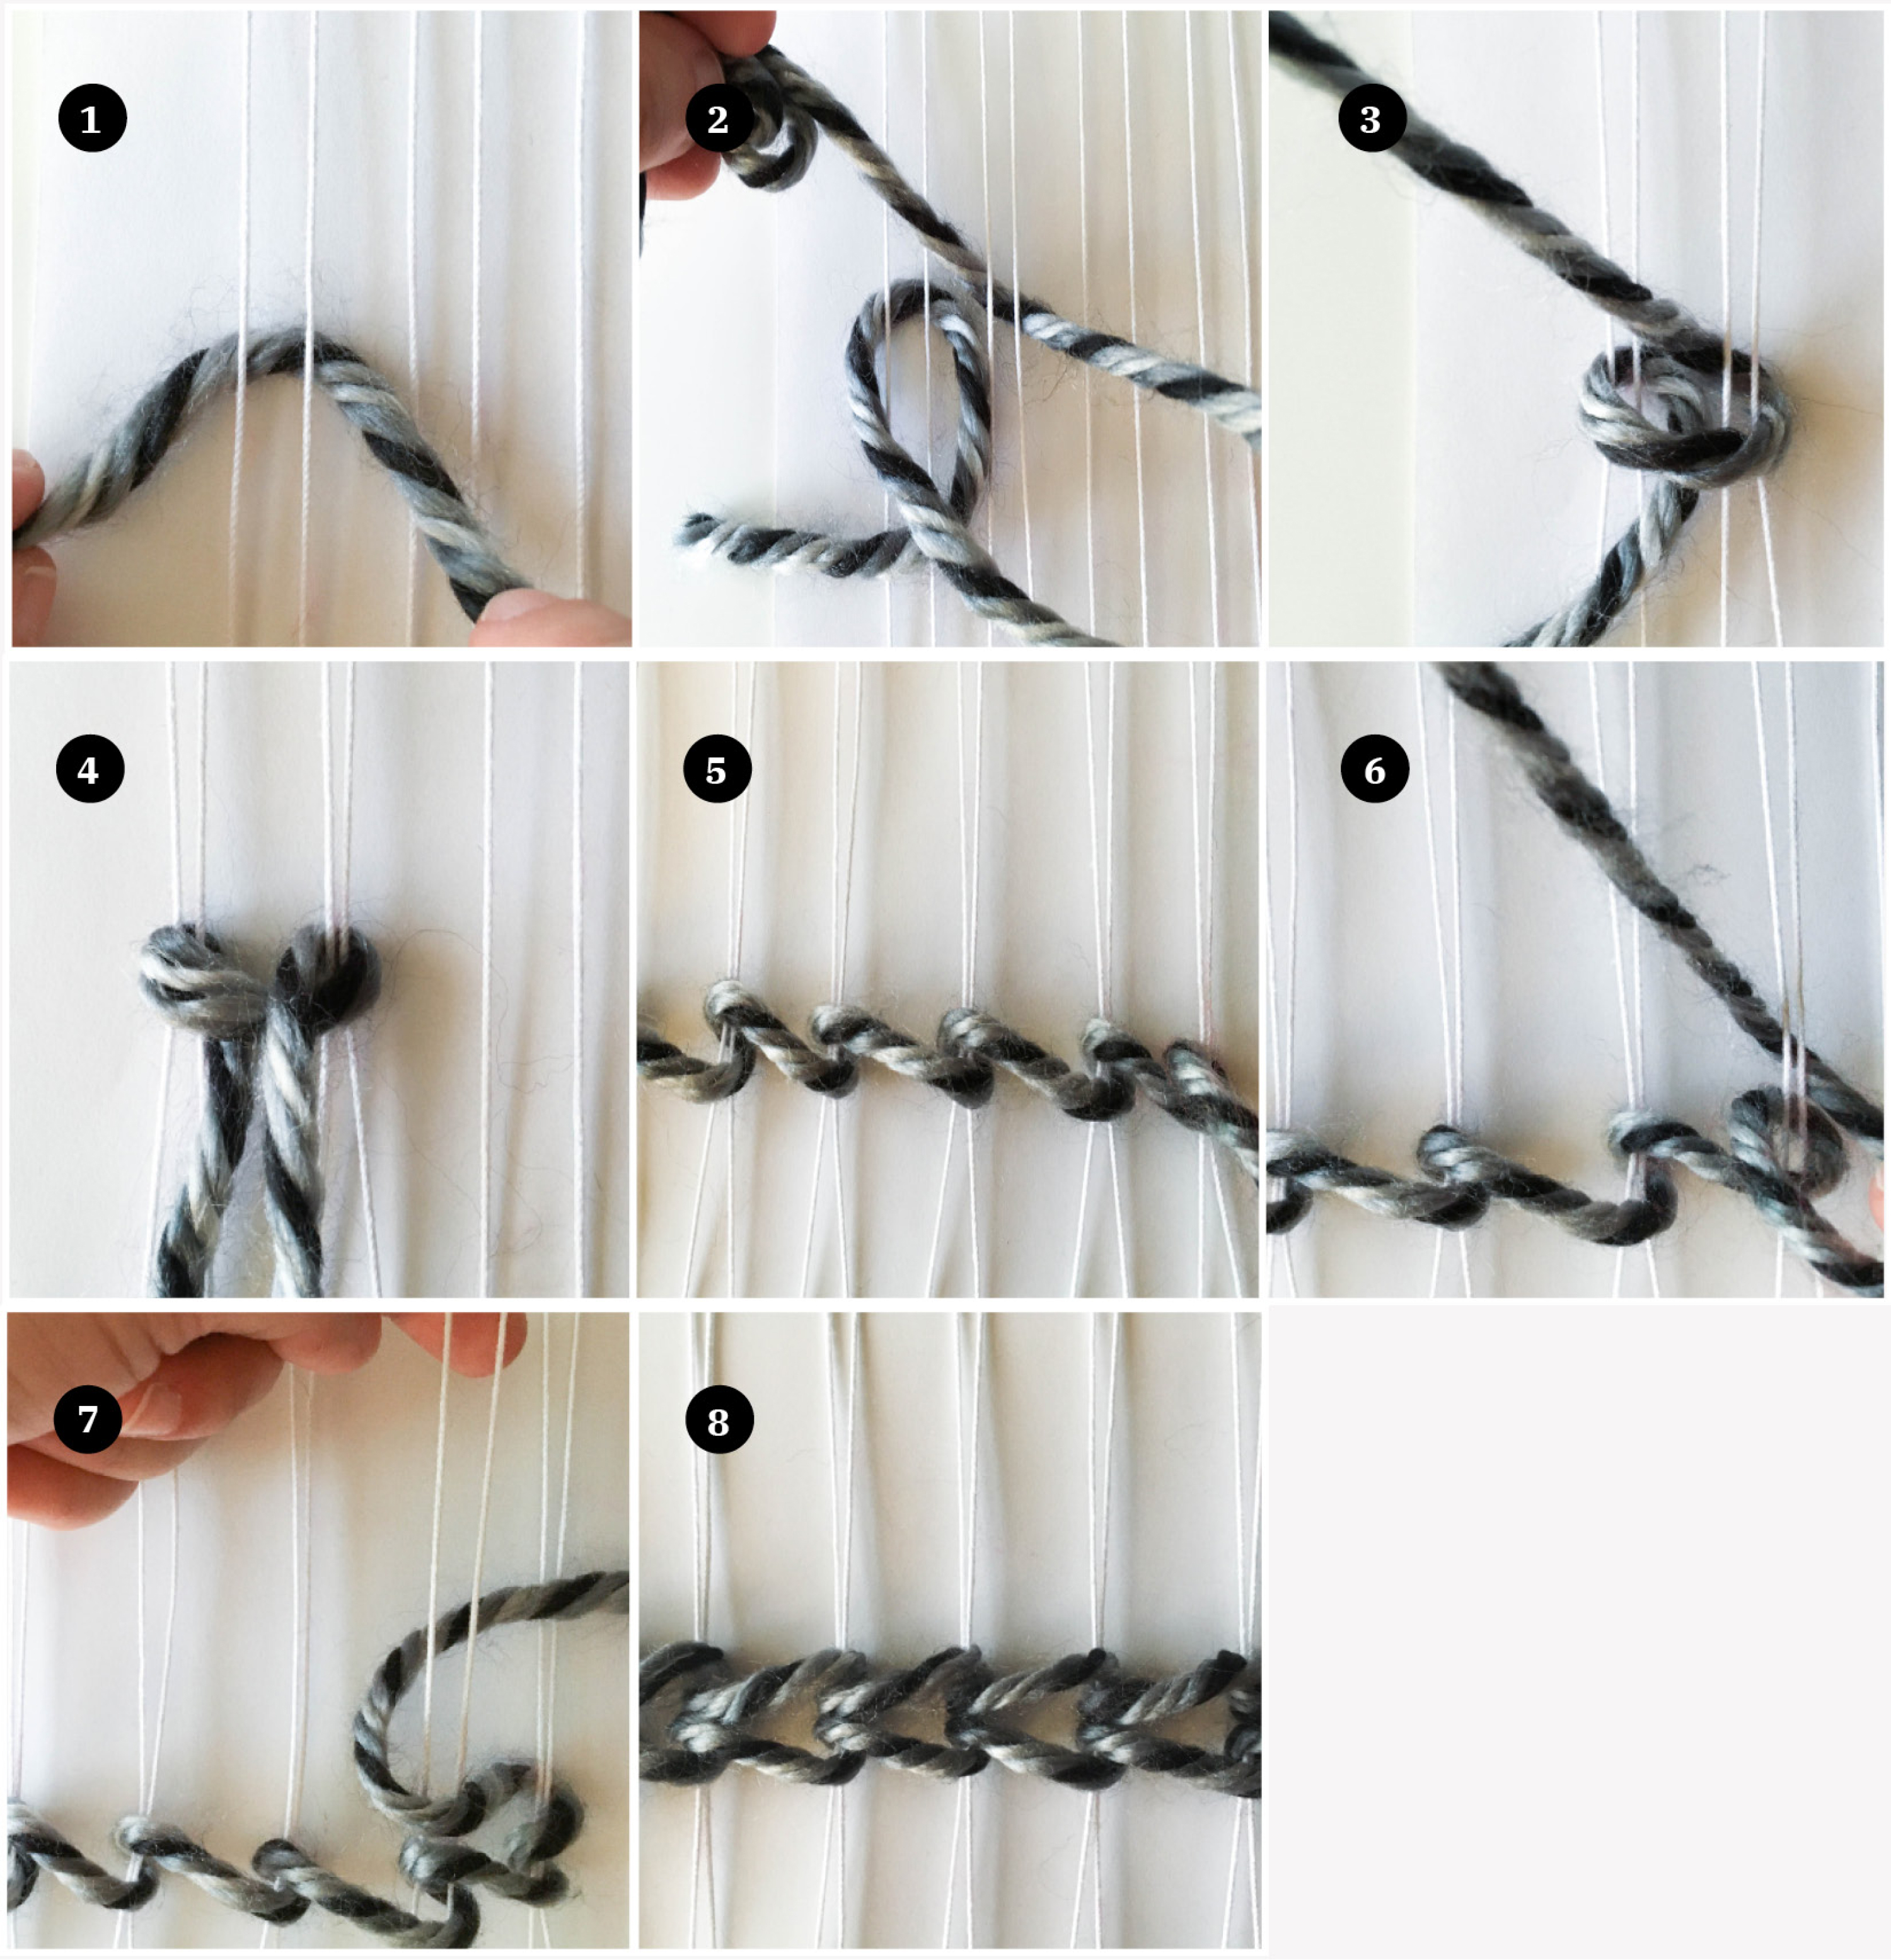 Composite of eight images showing various stages of weaving.